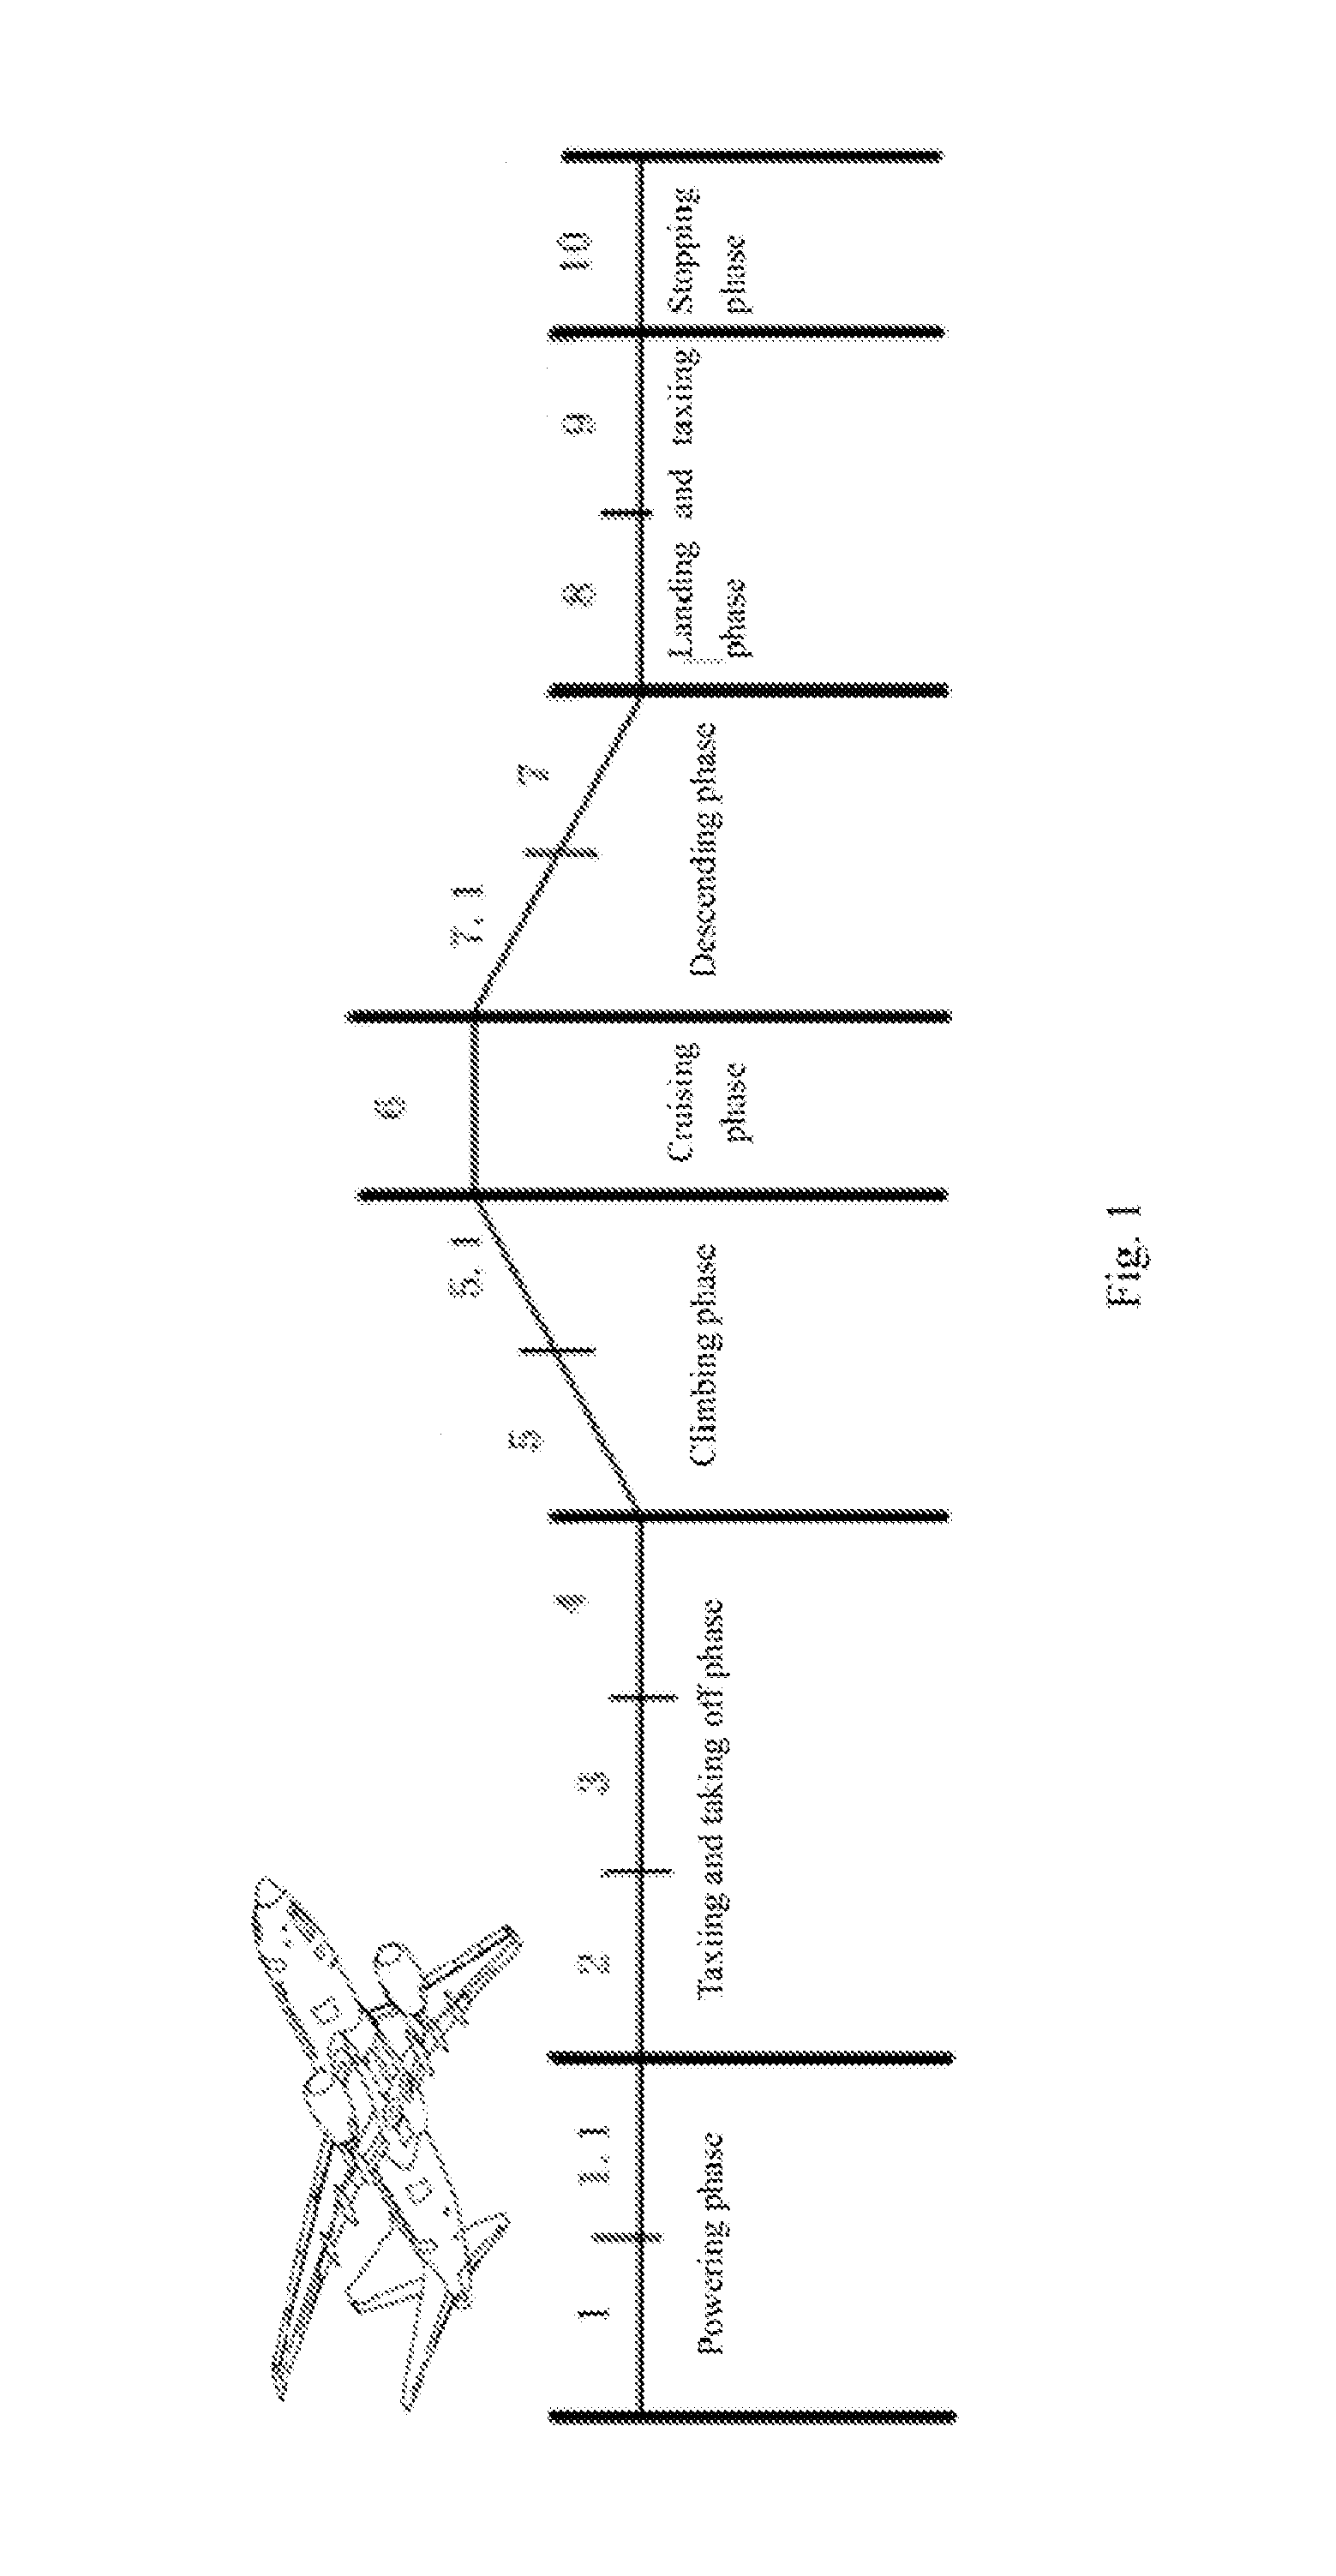 System and method for detecting addition of engine lubricant